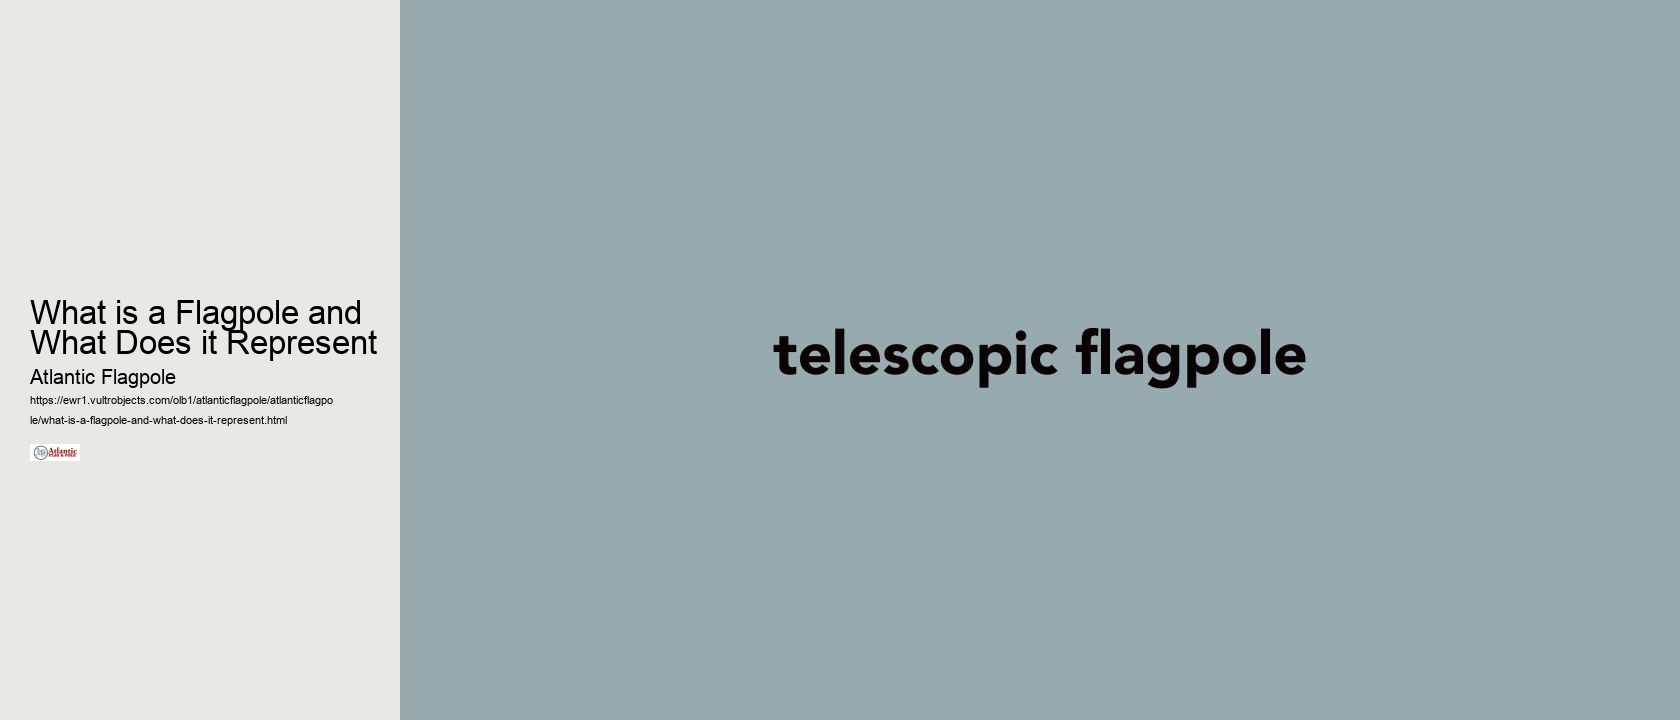 What is a Flagpole and What Does it Represent